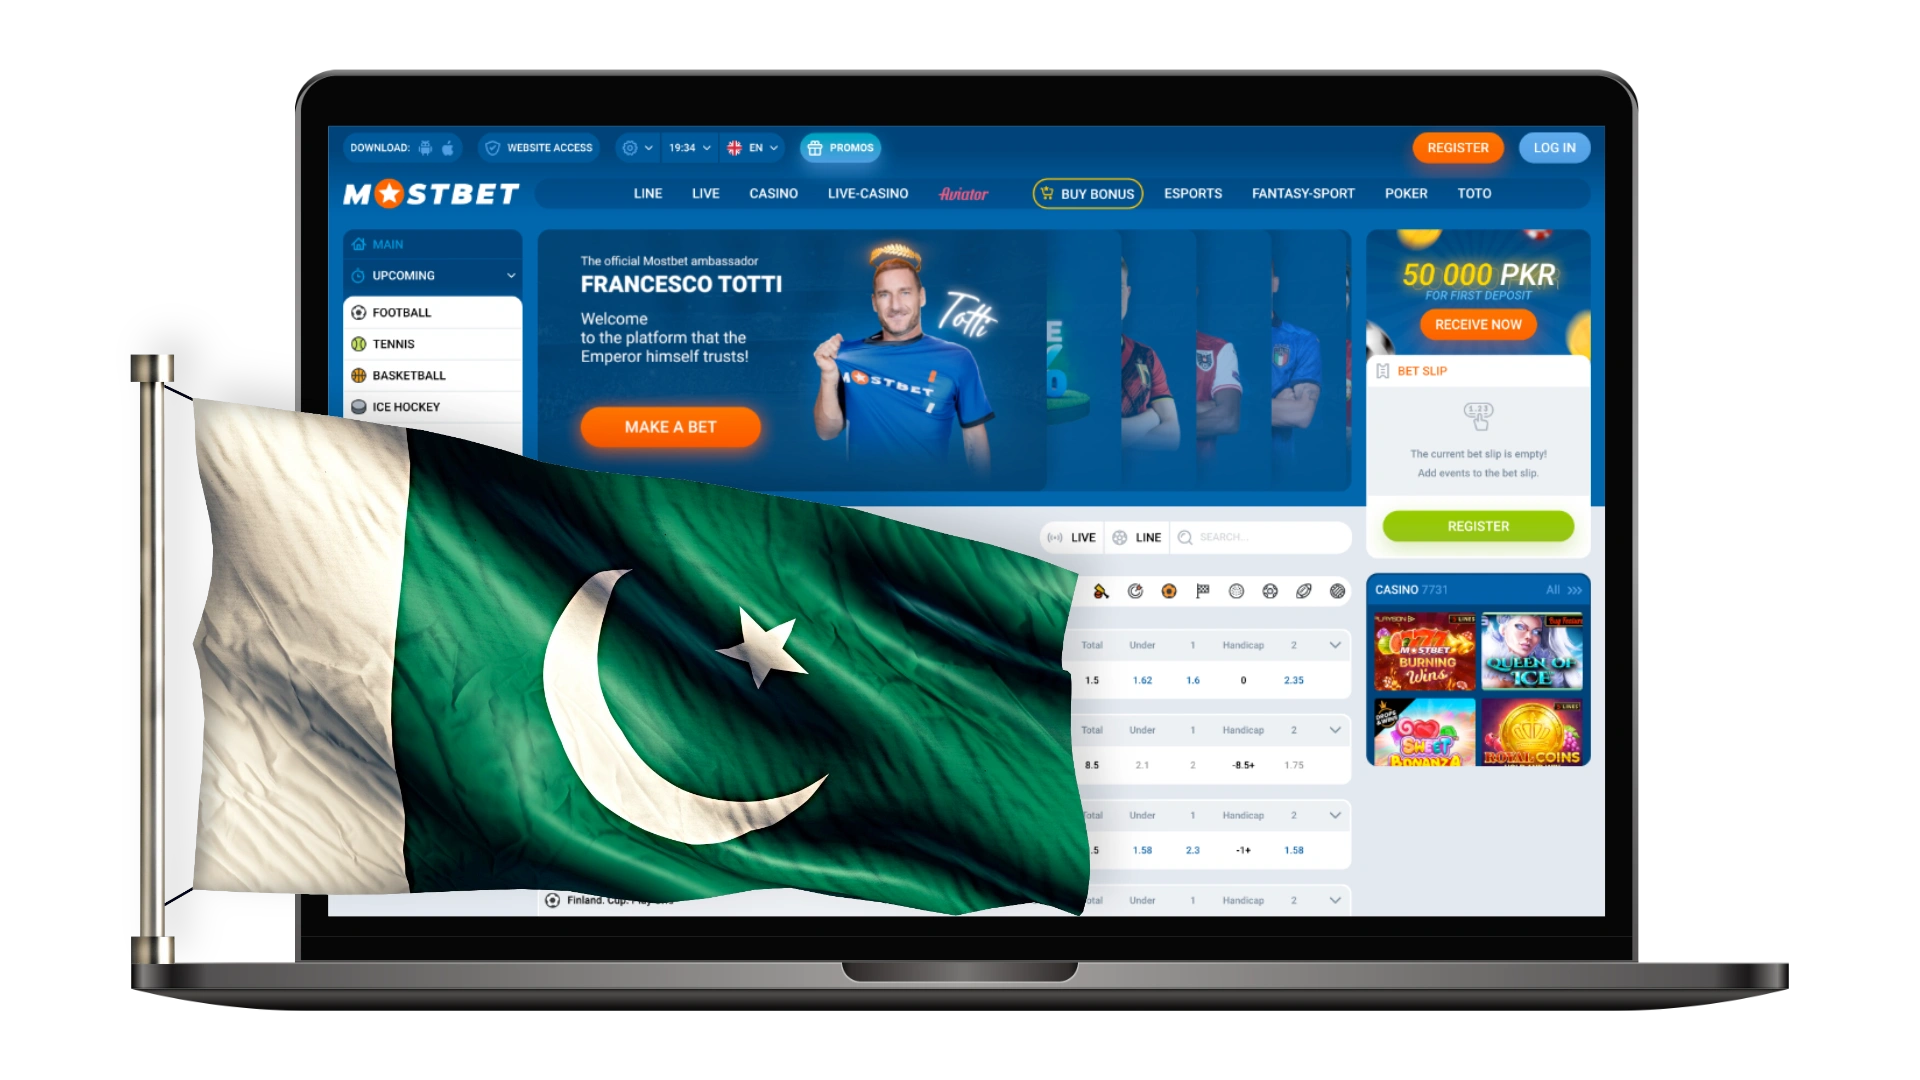 The official website of Mostbet for legal betting in Pakistan